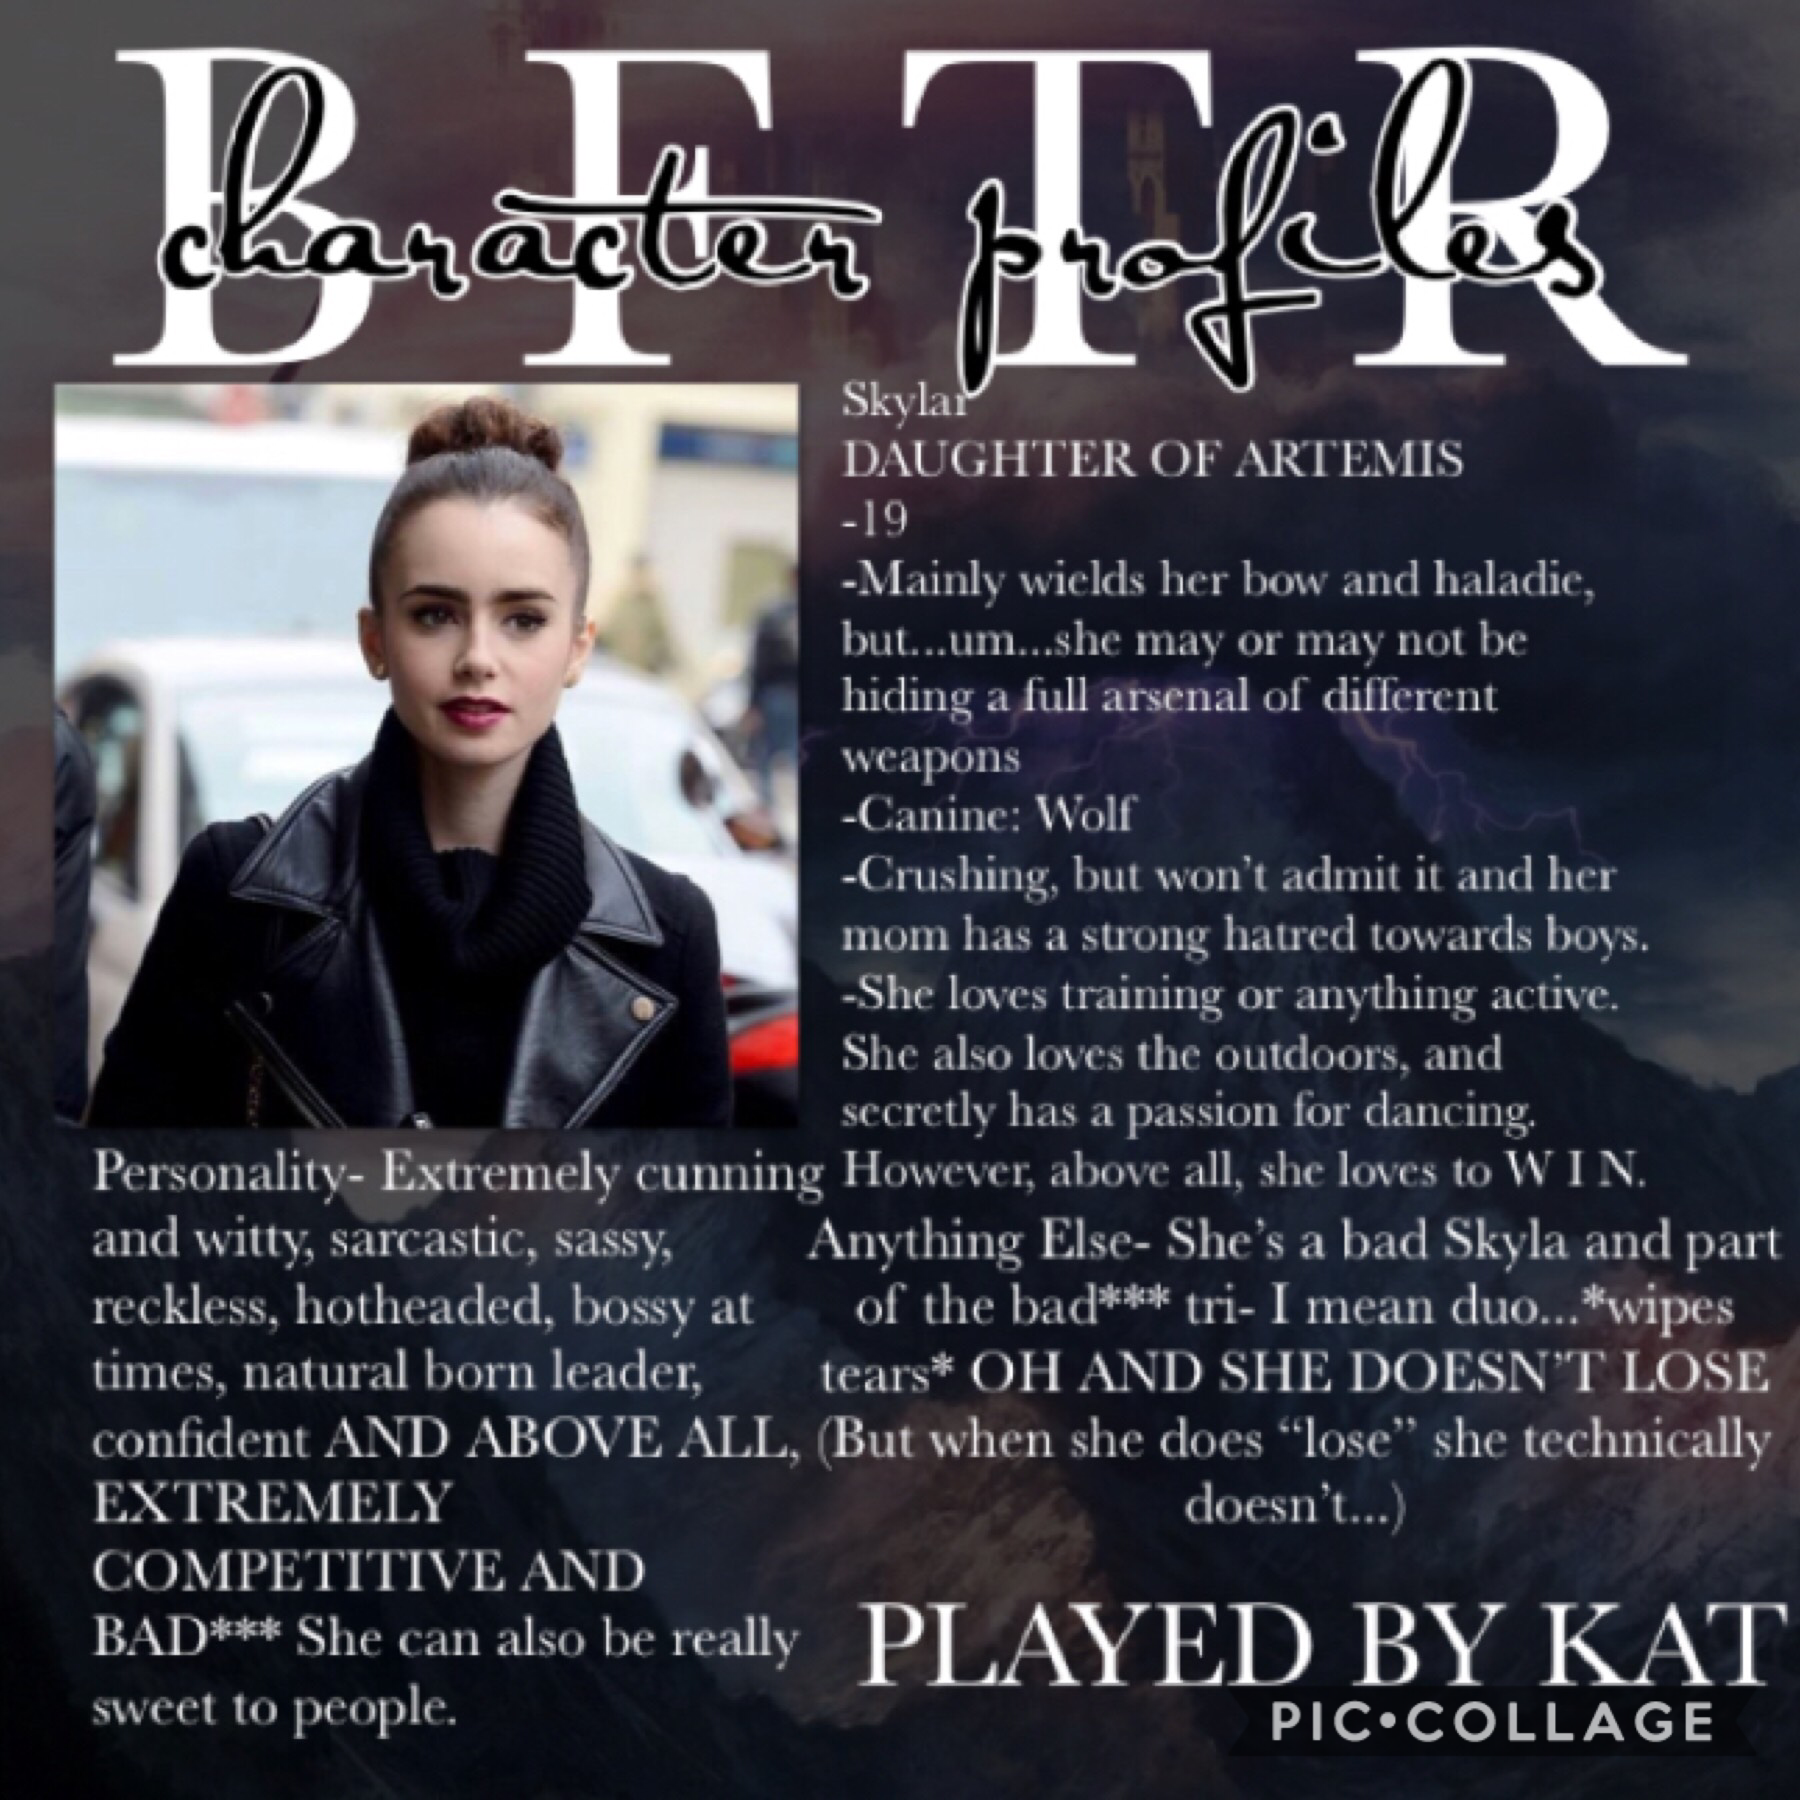 🖤PLAYED BY KAT🖤
If you manage to find this message, I just wanted to say, I PROMISE THERE ARE MORE GUYS